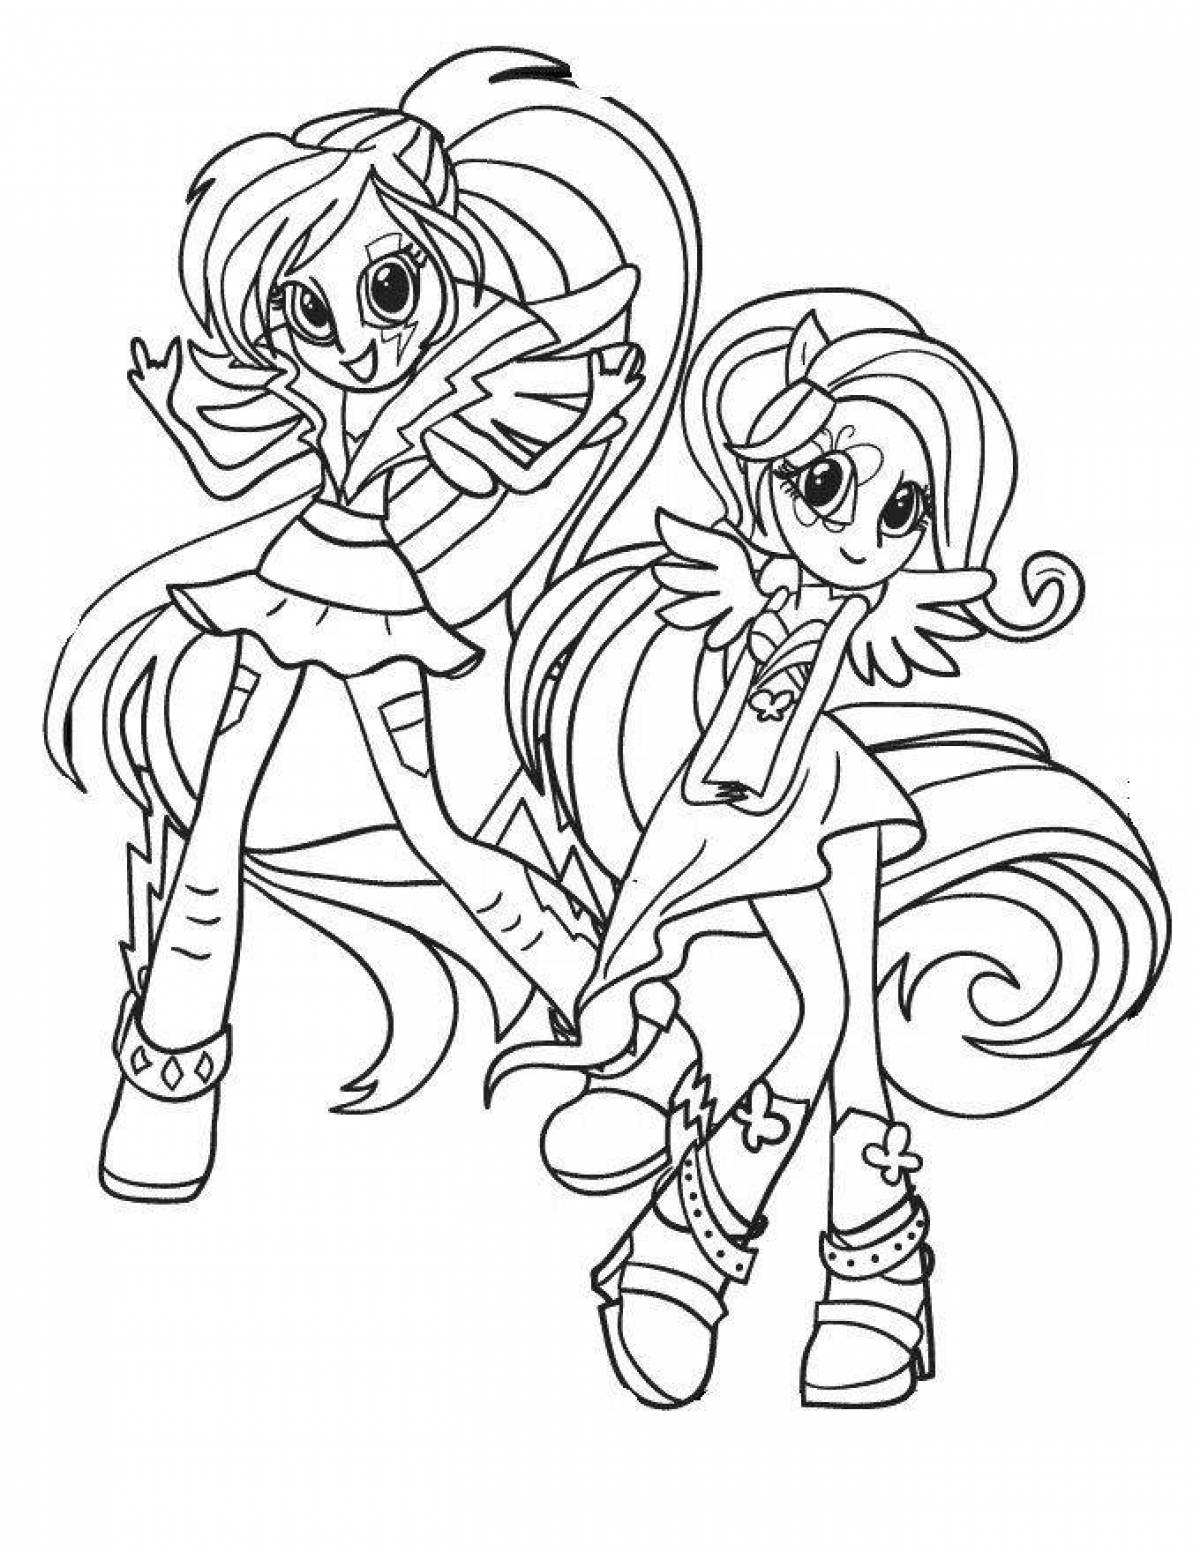 A lovely rainbow high coloring page